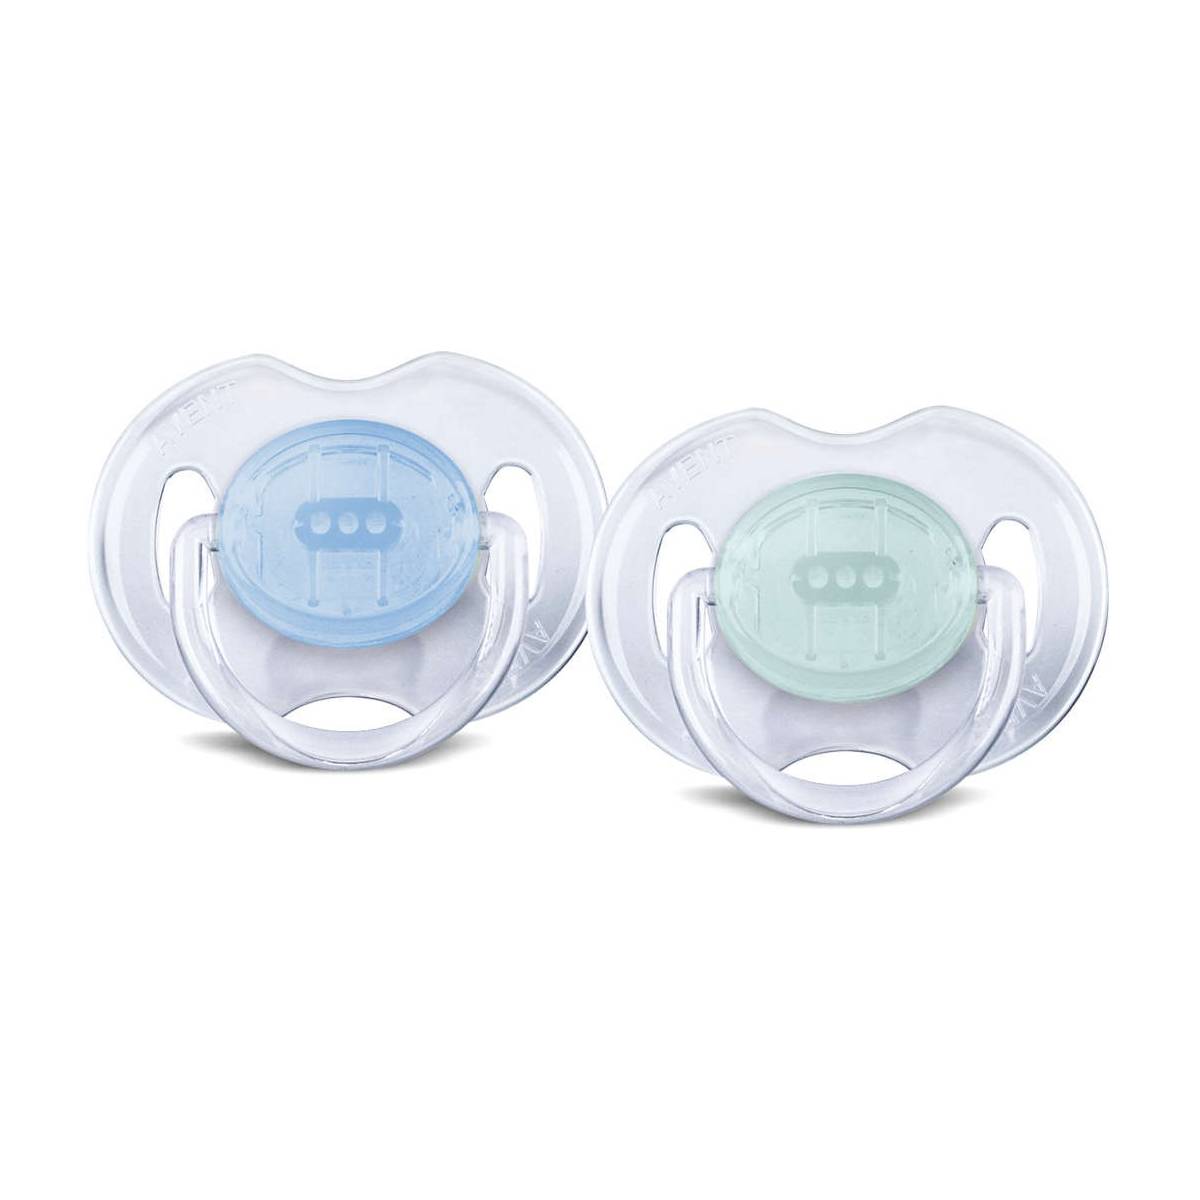 Philips Avent 2 Sucettes transparentes - Silicone 6-18 mois